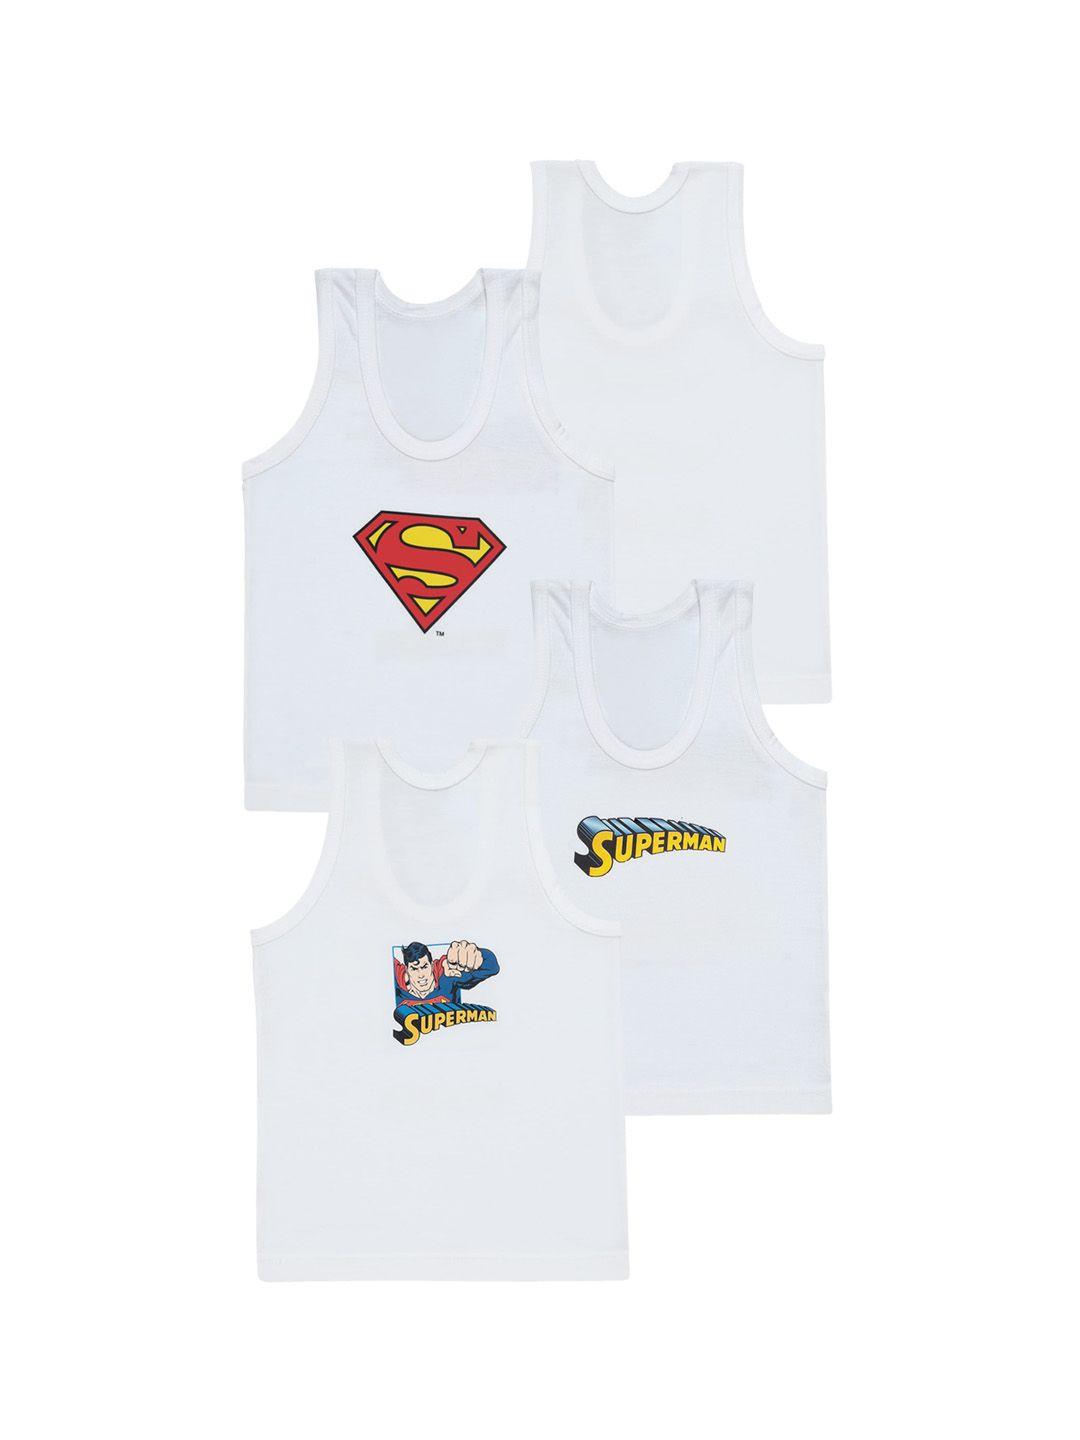 bodycare kids boys pack of 4 printed cotton innerwear vests